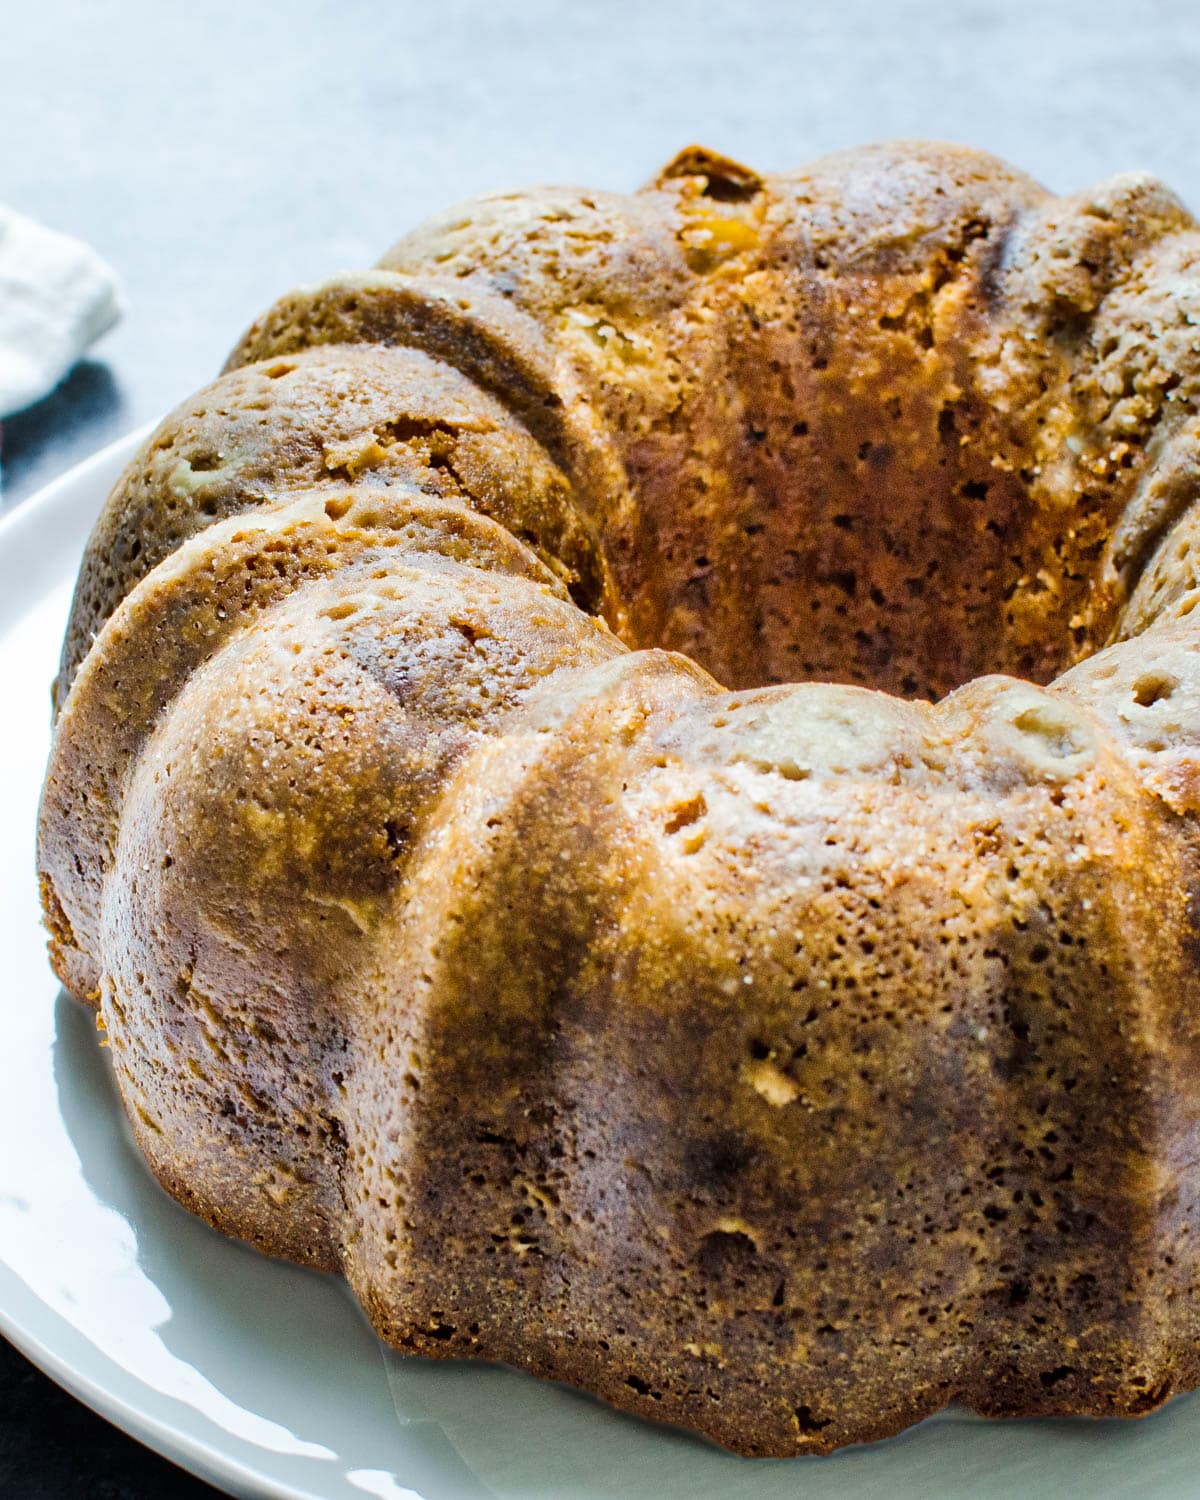 The bundt cake after removing it from the pan.